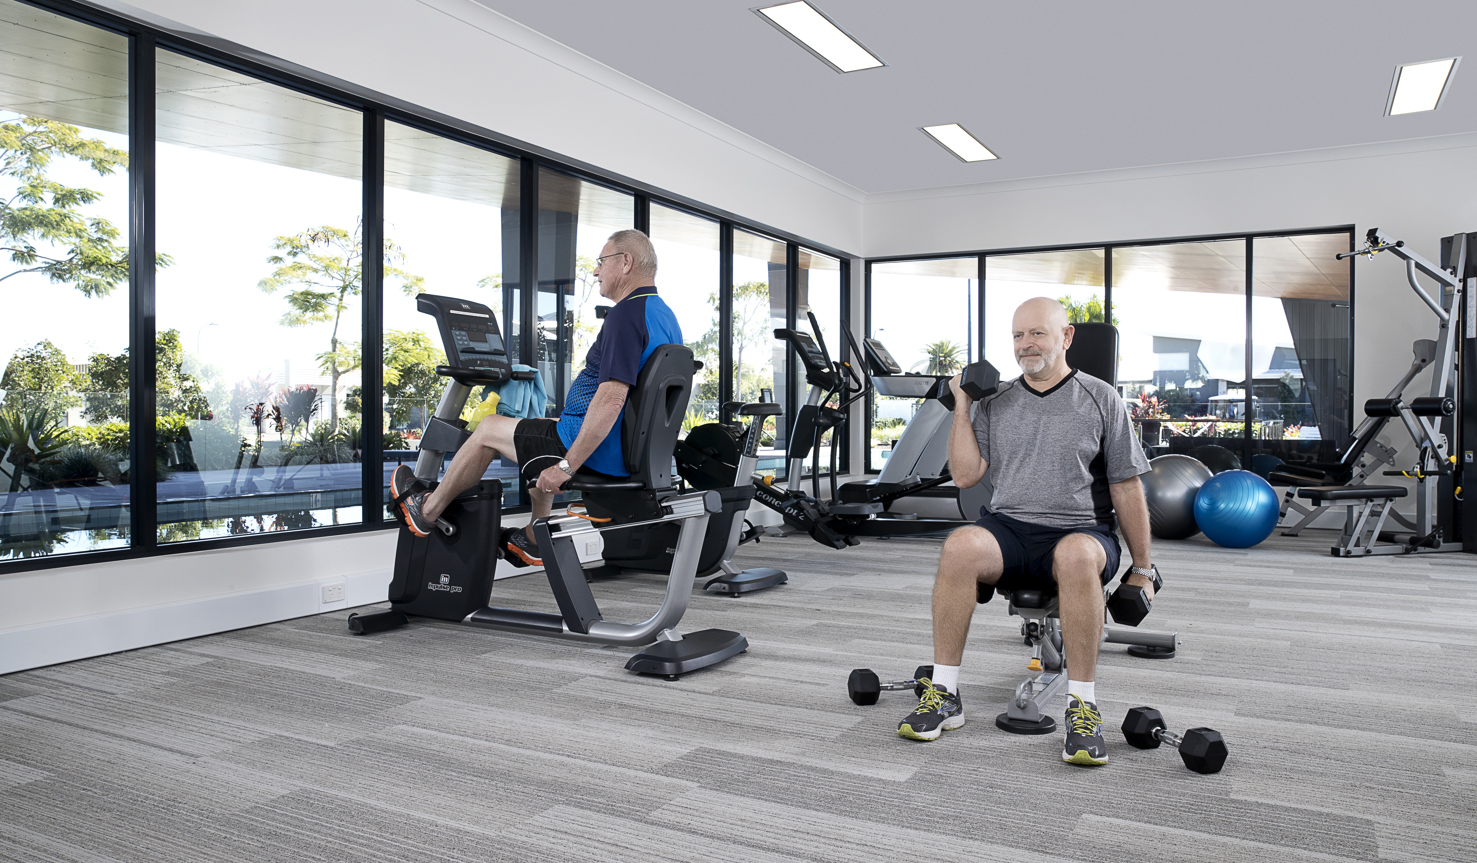 Active homeowners using gym and equipment at the Vision by Halcyon gym